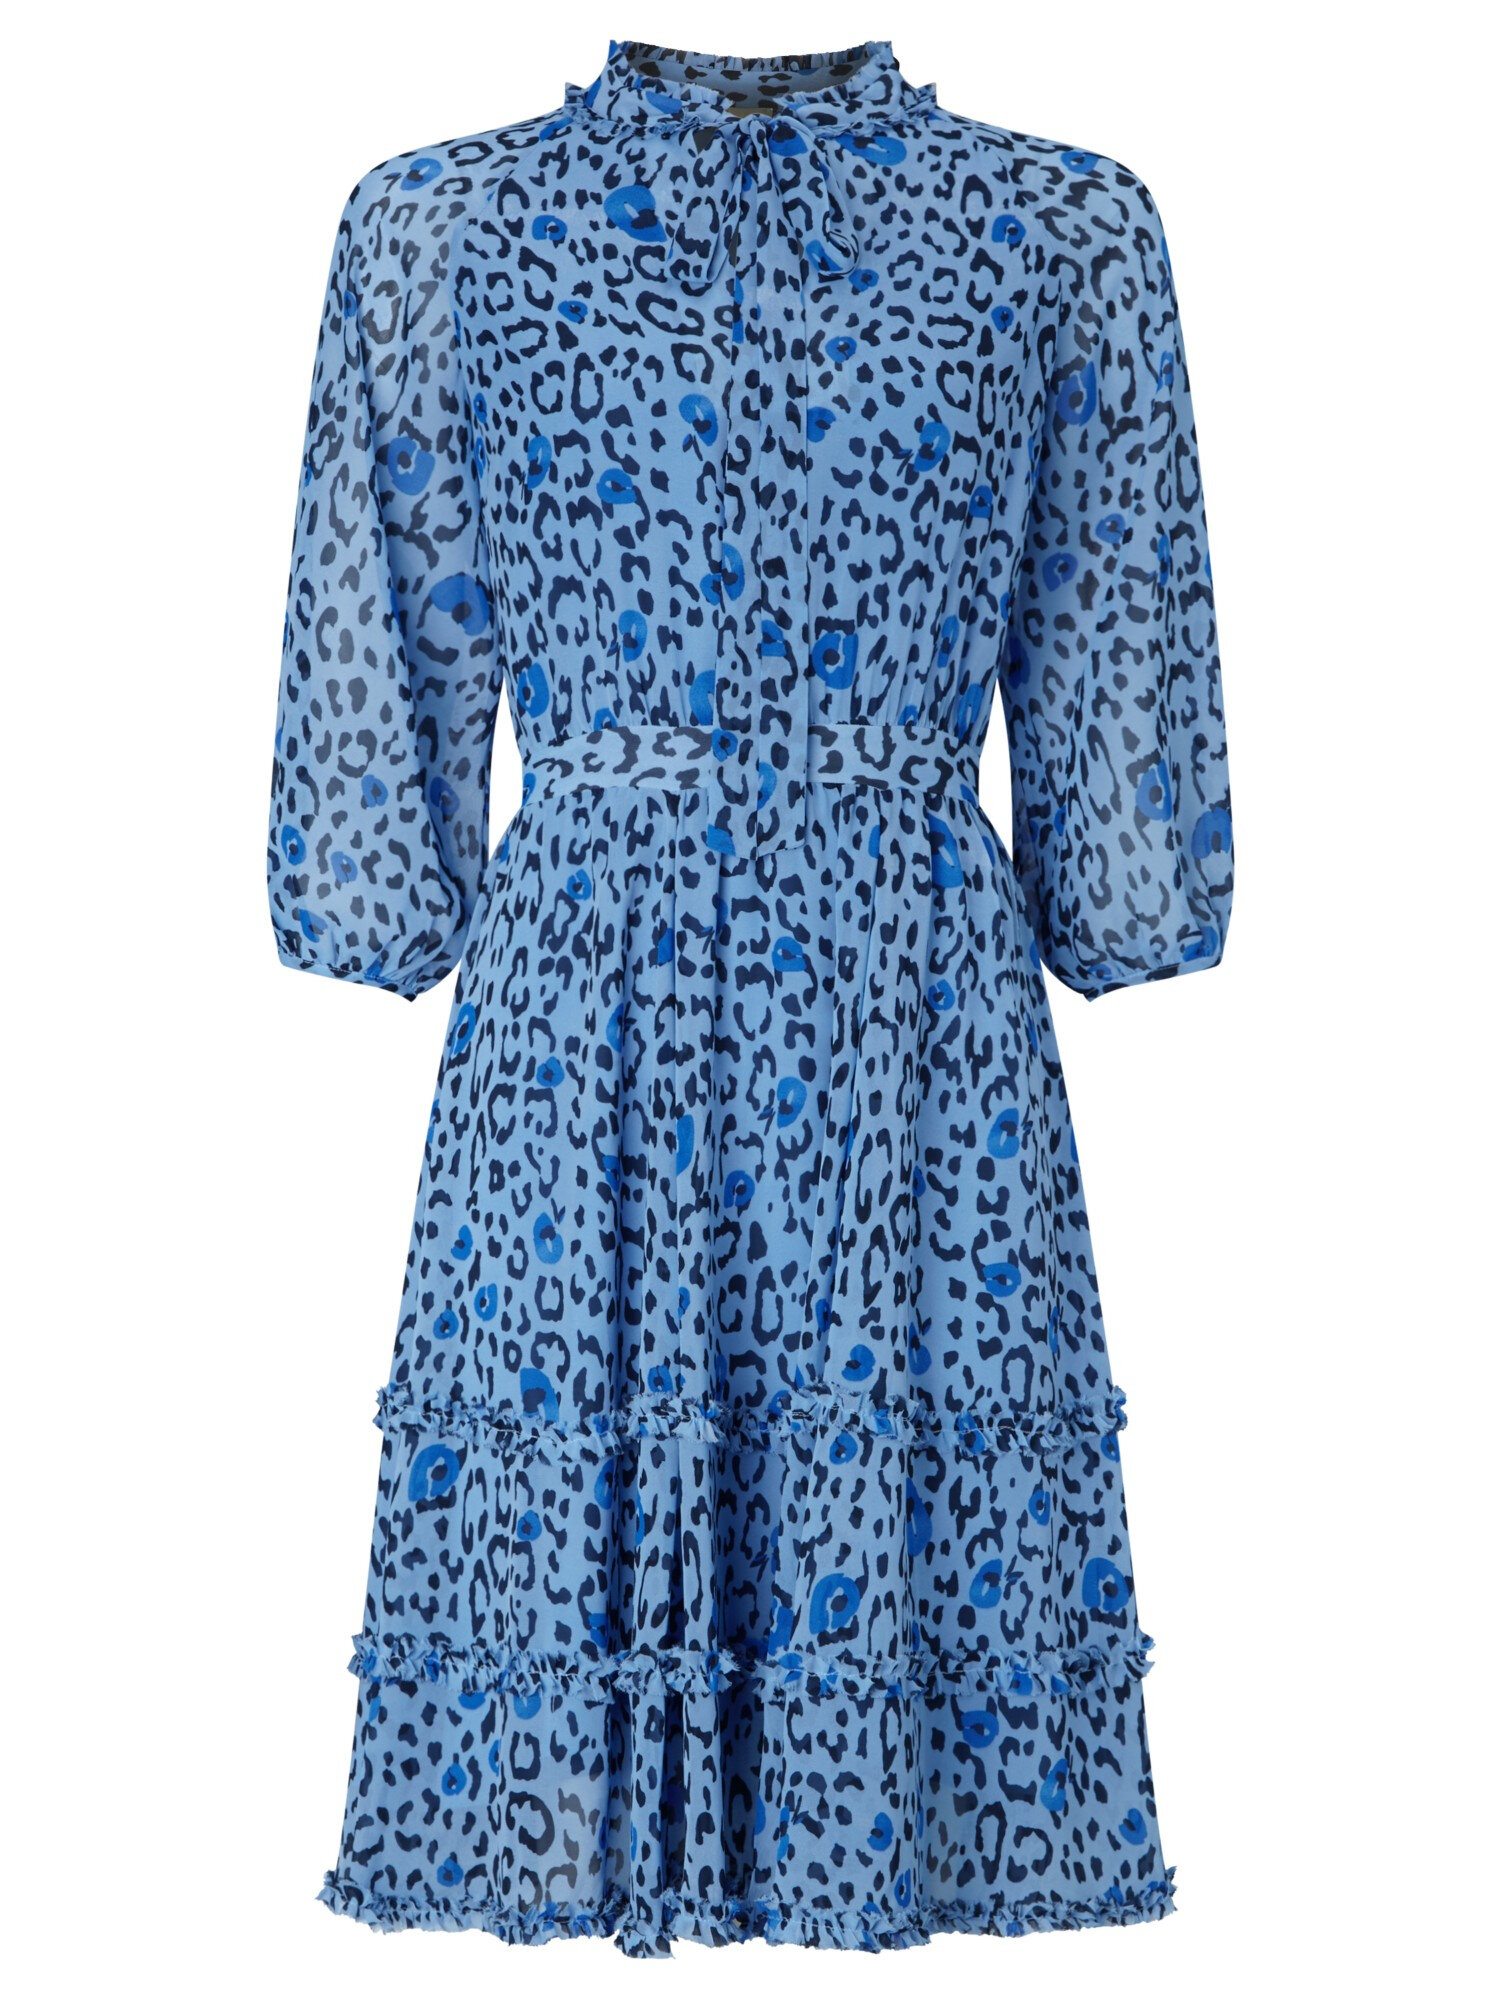 somerset-by-alice-temperley-blue-leopard-print-dress-product-3-304992144-normal.jpeg